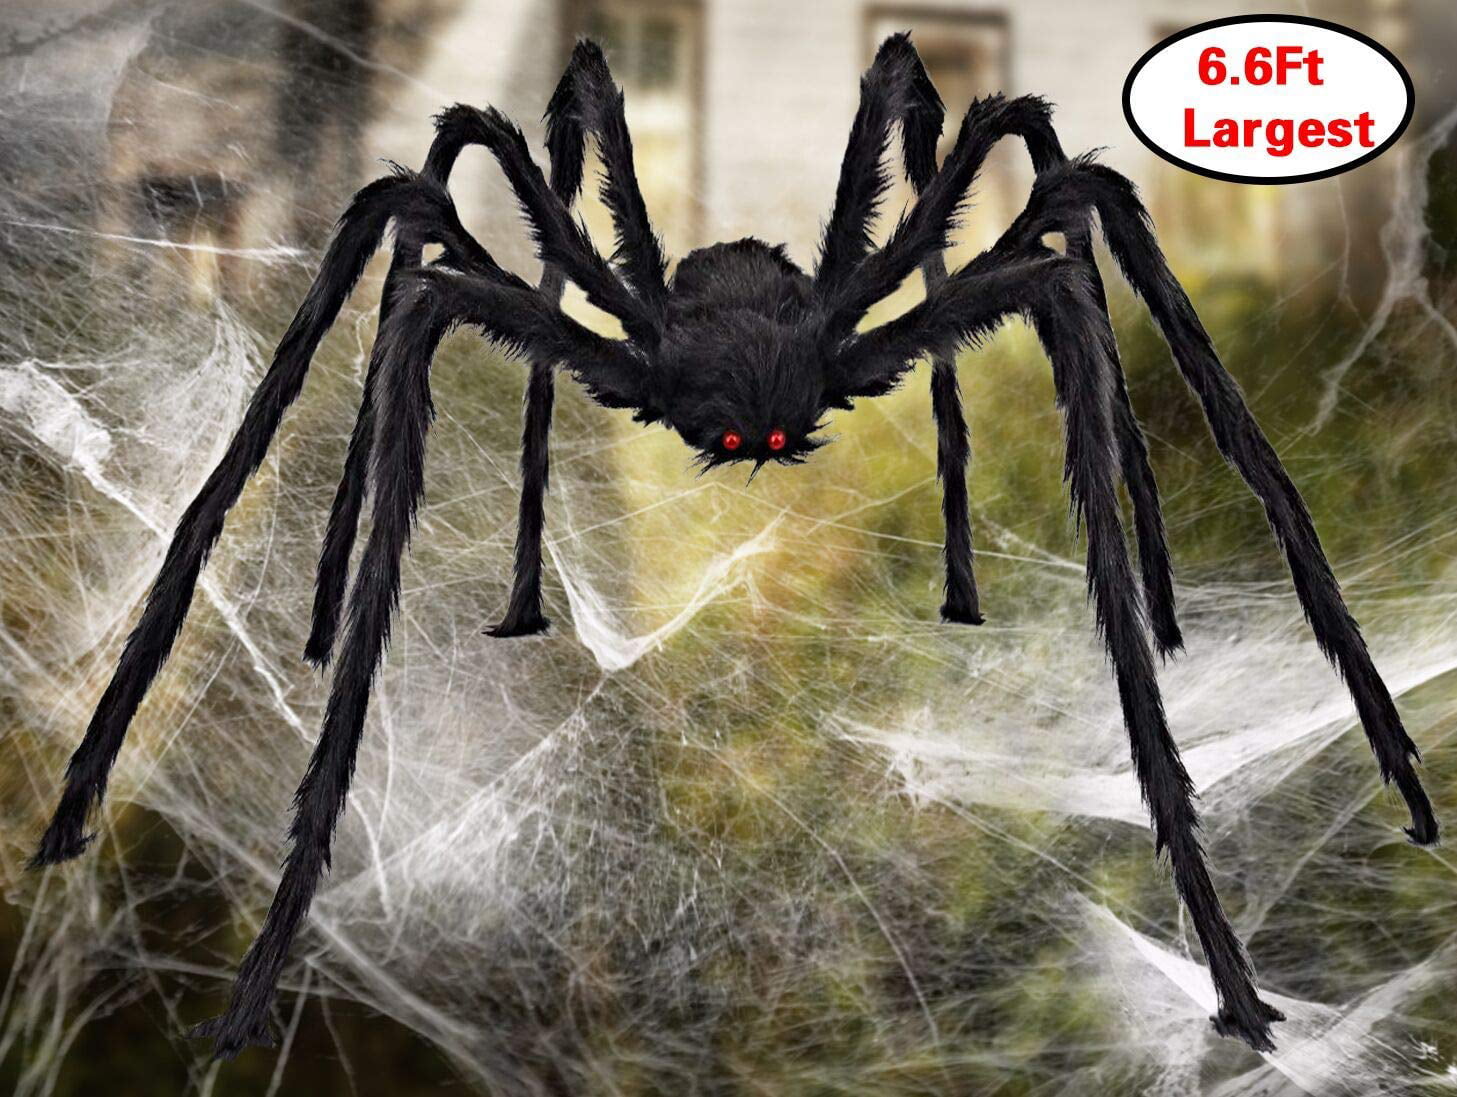 Outdoor Halloween Decorations Scary Giant Spider Fake Large Spider ...